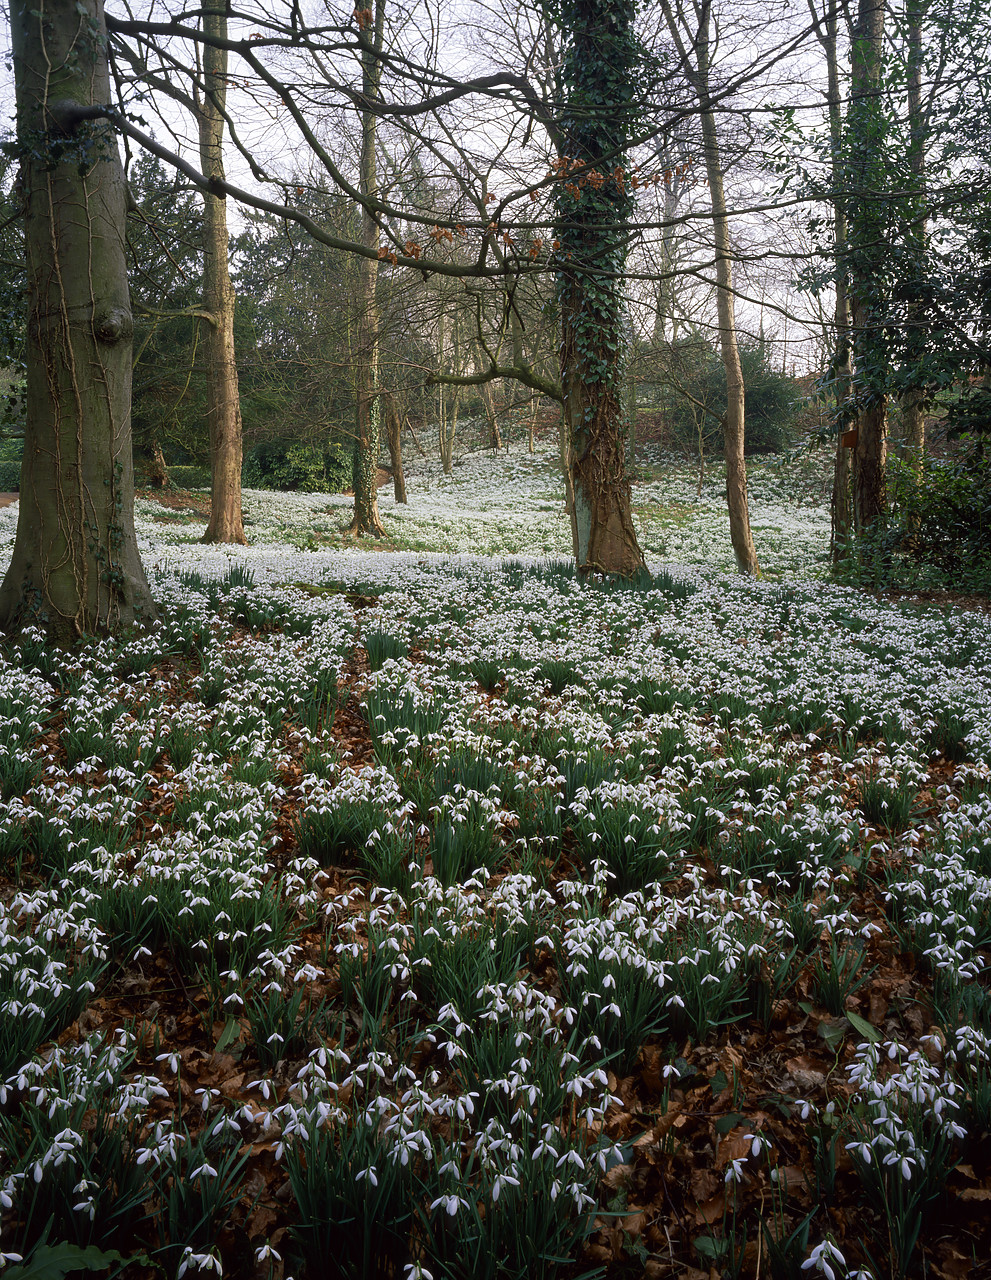 #980637-5 - Woodland of Snowdrops, Painswick Rococo Gardens, Gloucestershire, England